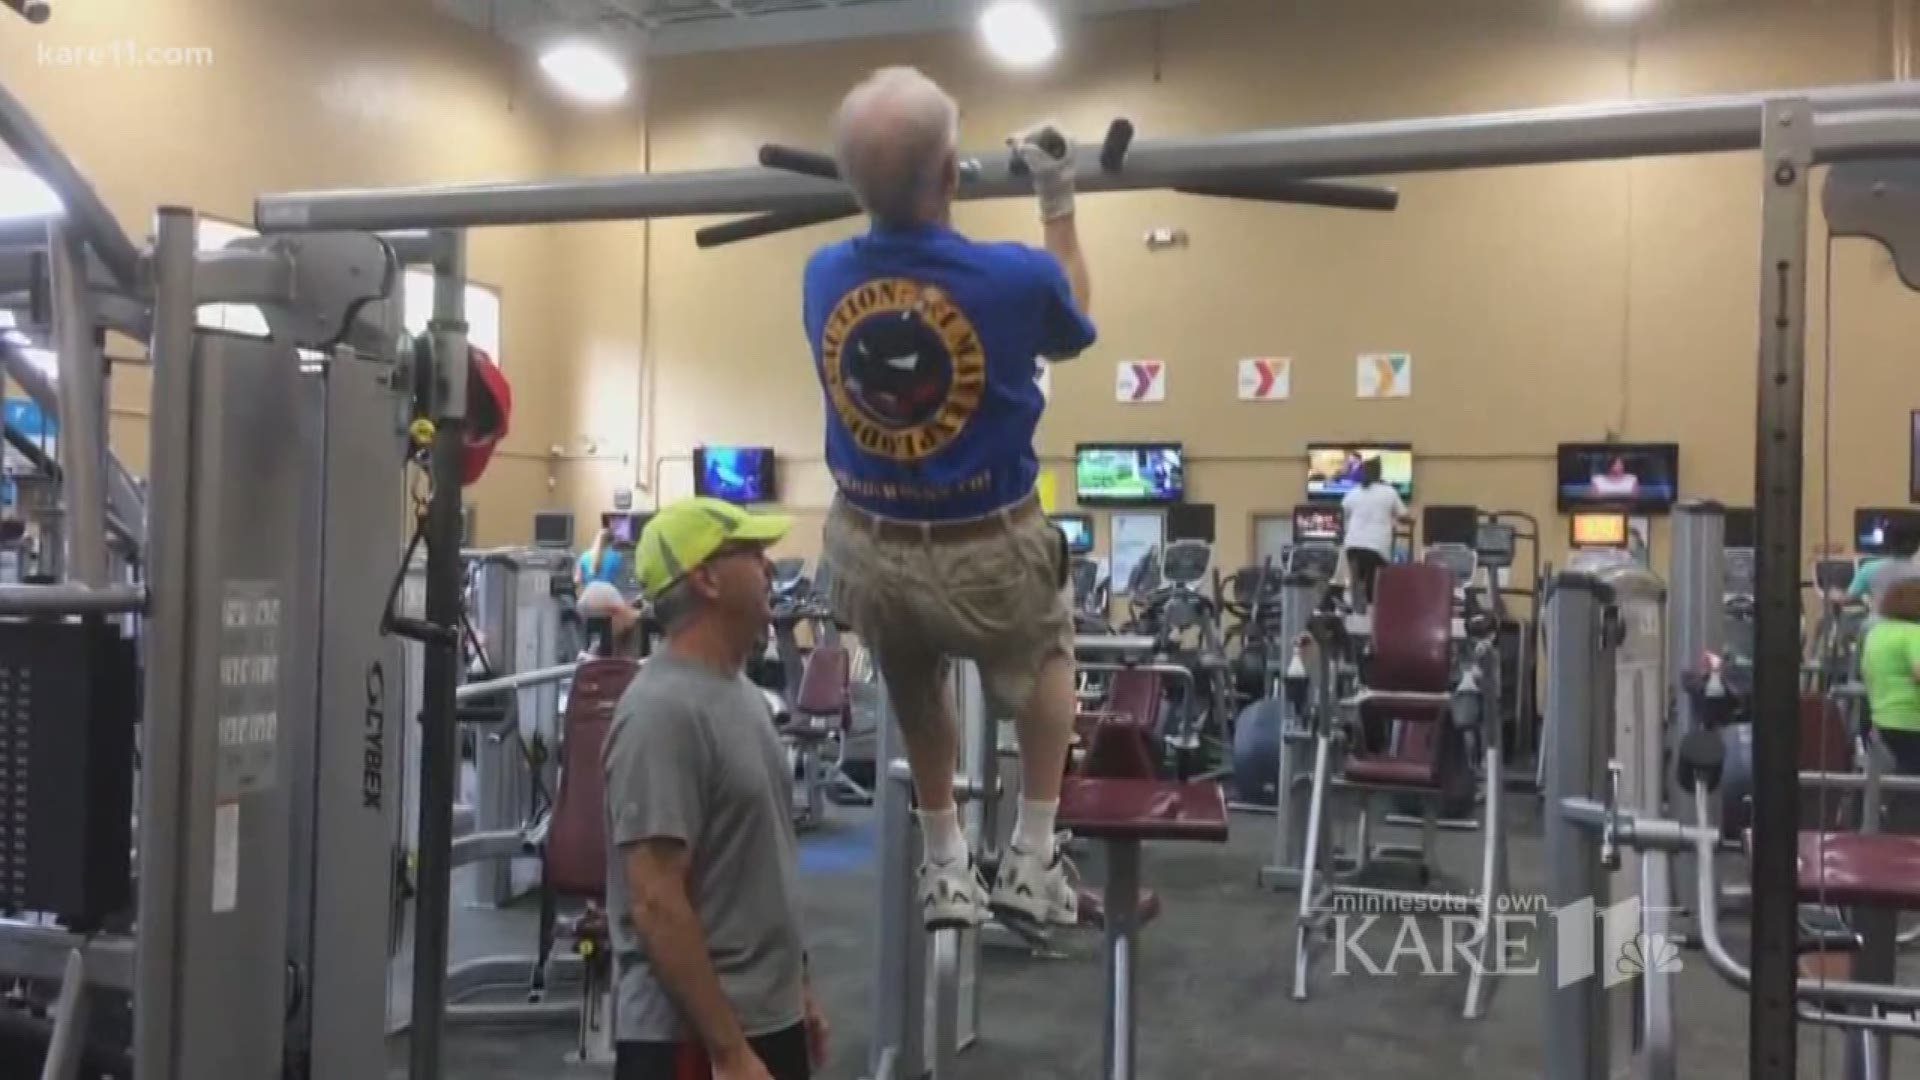 Dan Disalvo used a health scare to find a new hobby. Seventeen years ago, the 88-year oldunderwent quadruple bypass surgery. Disalvo says he's been on a health kick ever since.